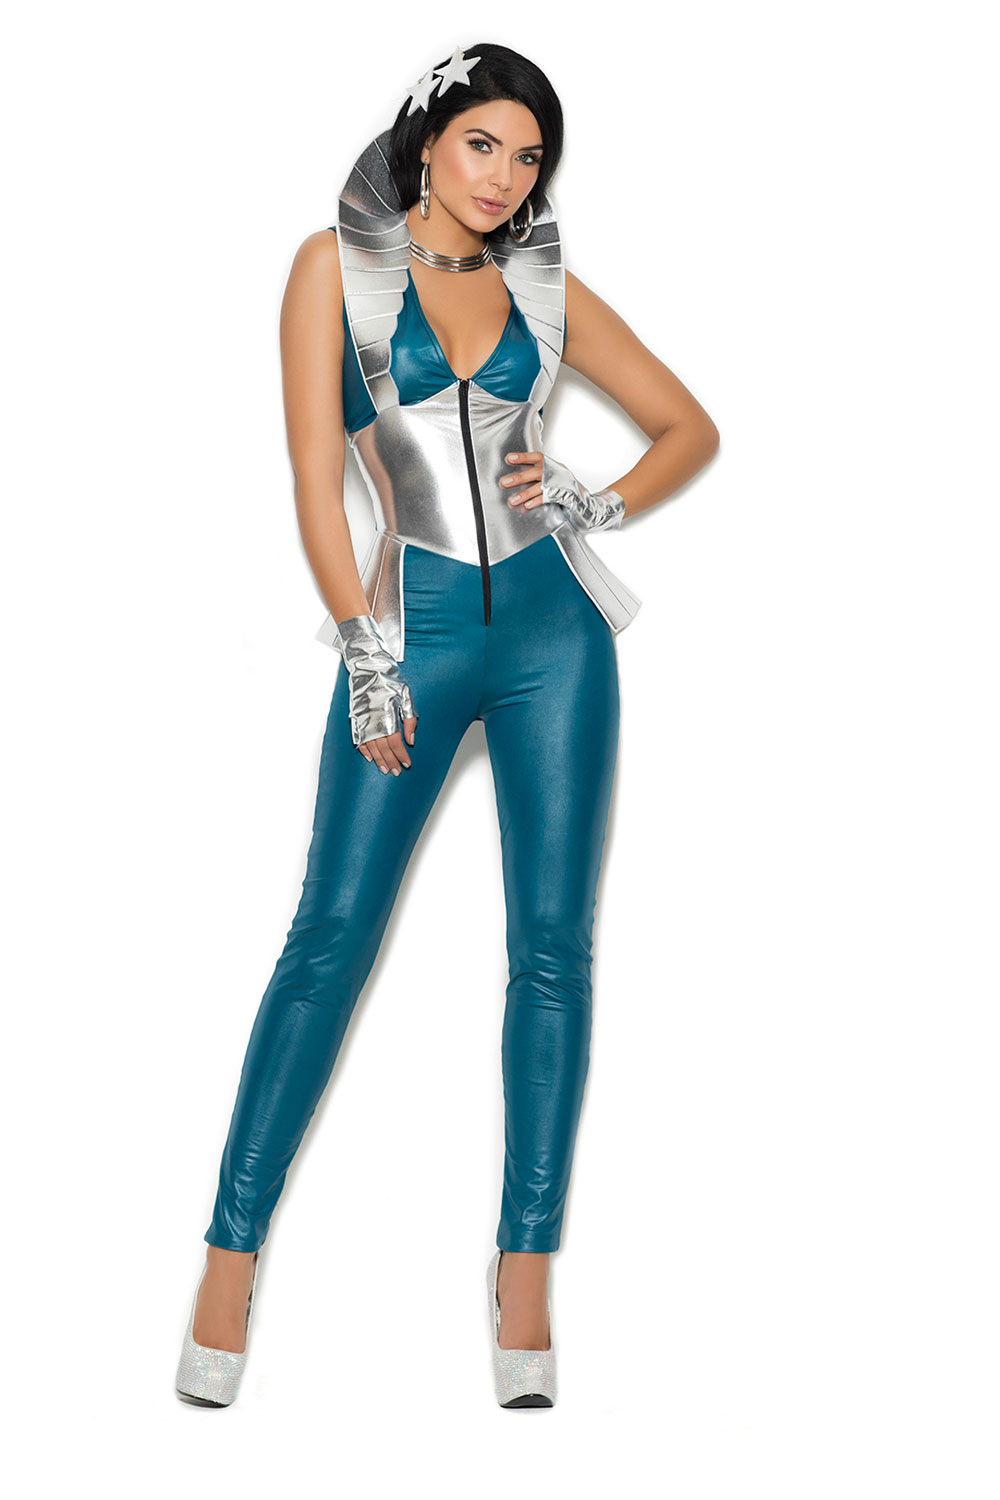 Sexy Galaxy Girl Blue & Silver Catsuit Costume 3pc Elegant Moments 99081